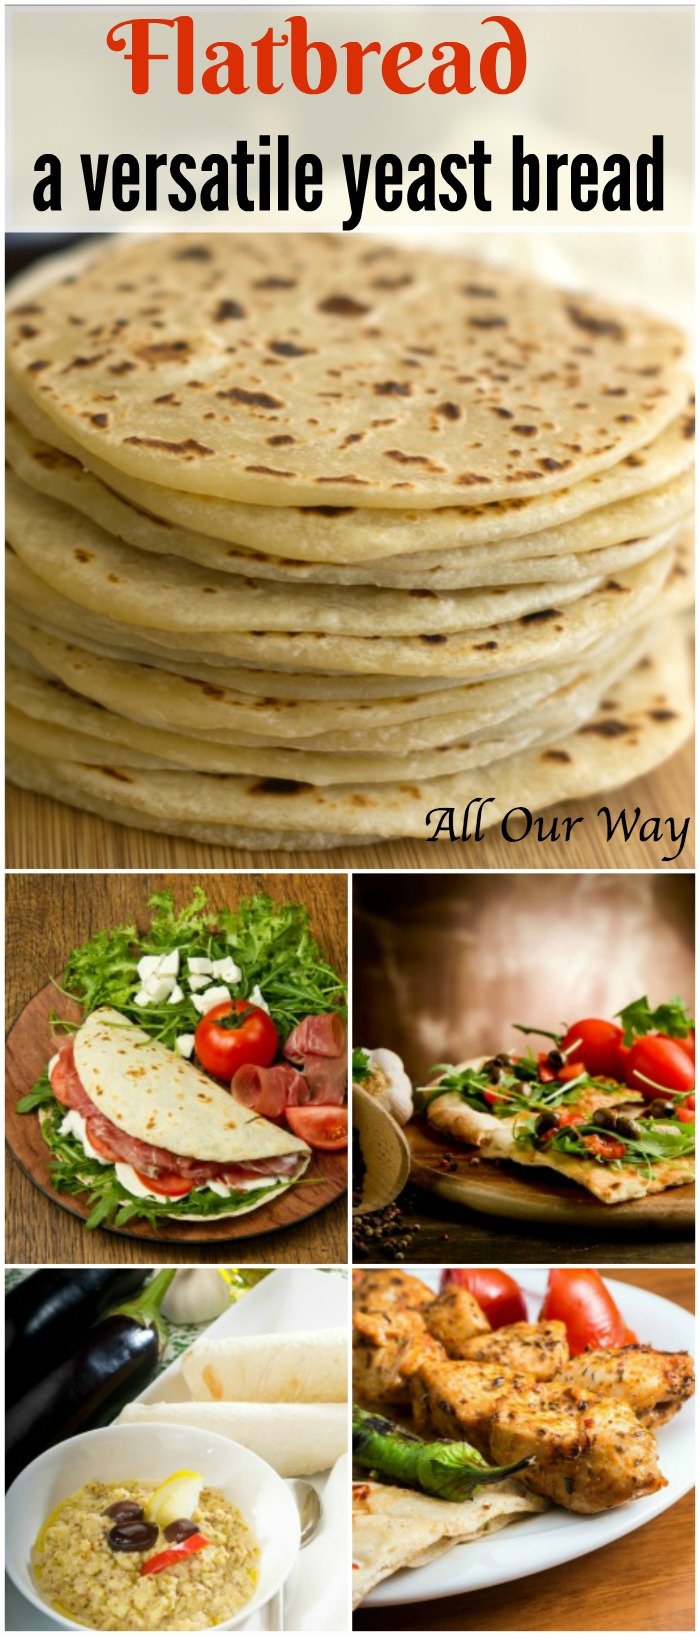 Flatbread a versatile Mediterranean yeast bread, a pocketless pita, that's a springboard for many delicious dishes from appetizers to main dishes. 